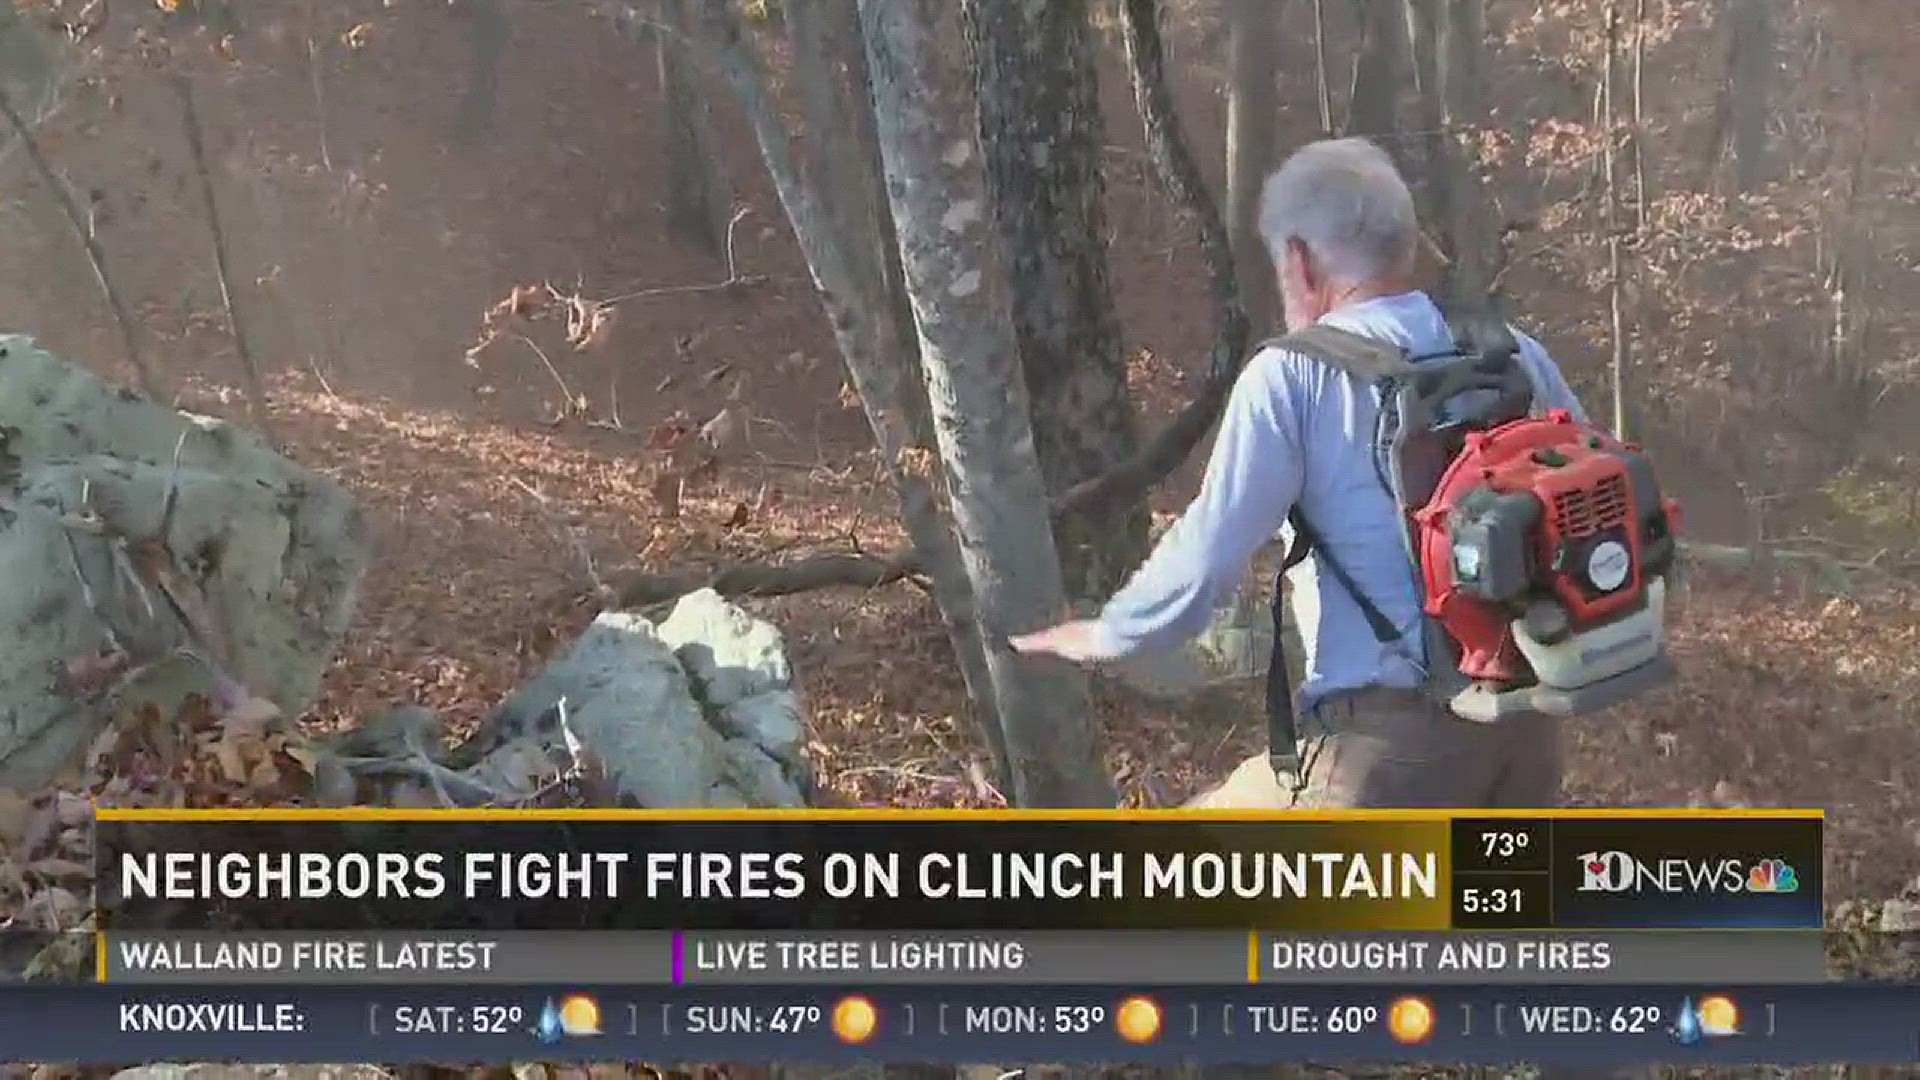 Nov. 18, 2016: Neighbors on Clinch Mountain are helping each other fight the fire that is threatening their homes.